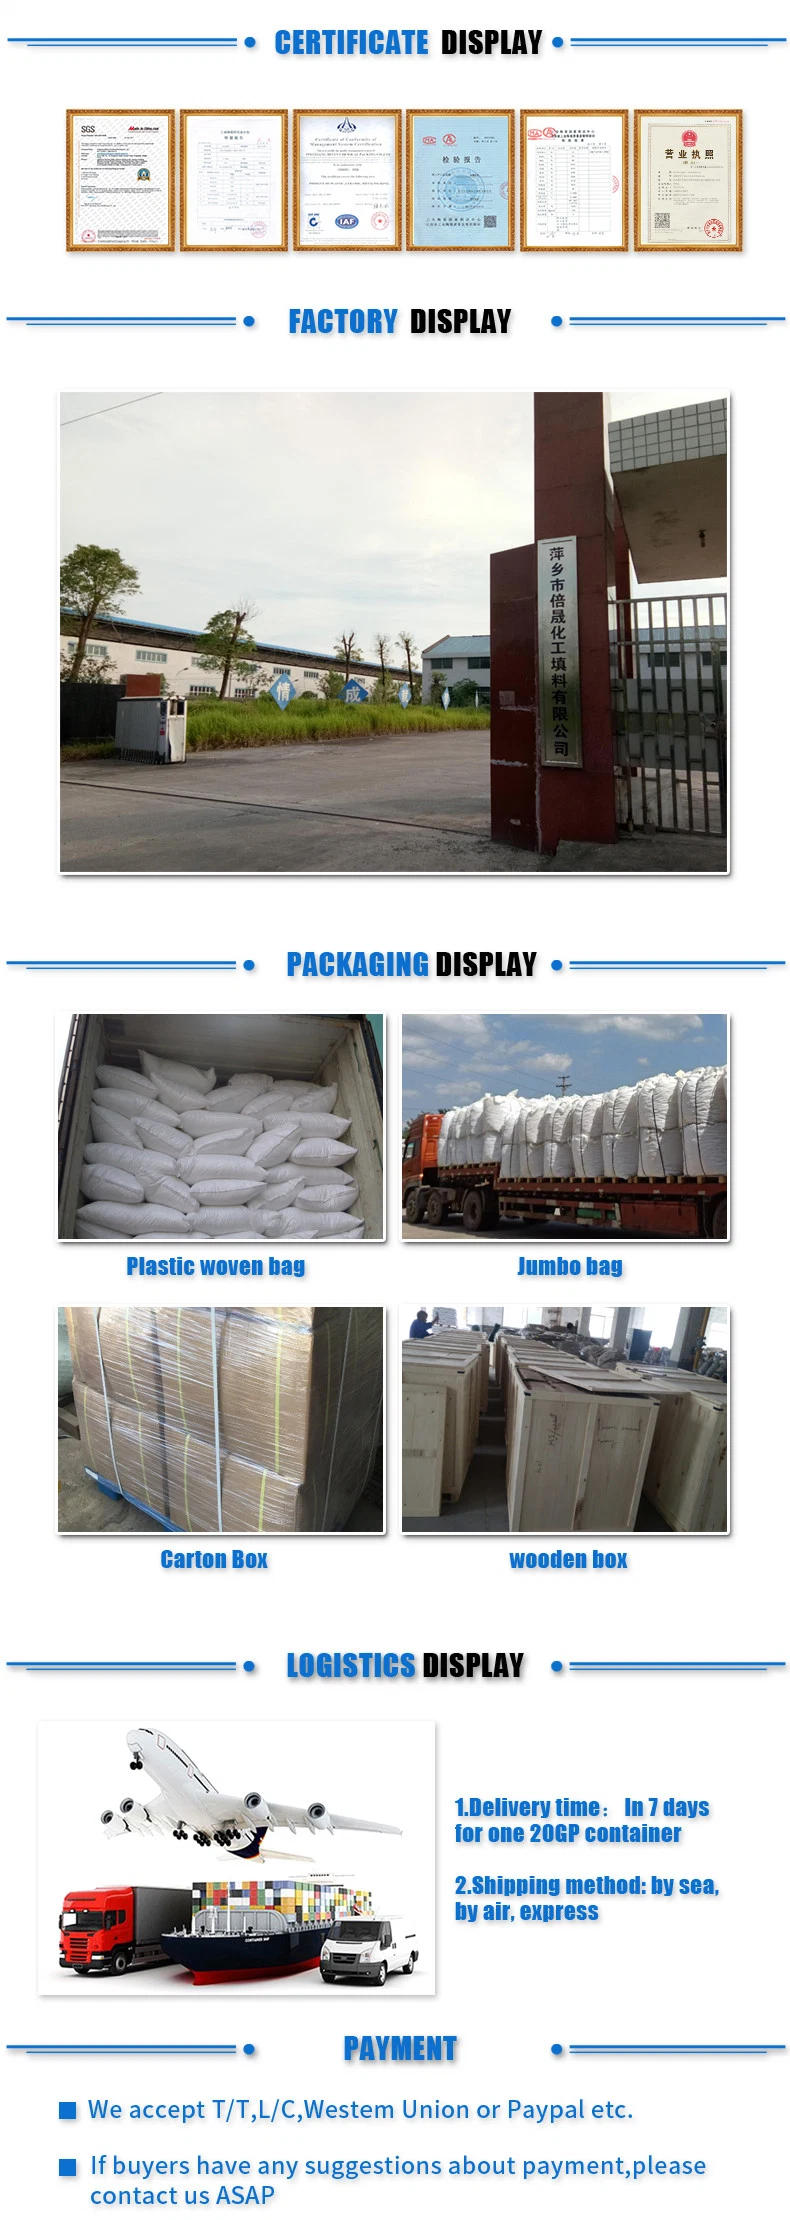 Acid Resistance PP PVC CPVC Plastic Tower Packing Cascade Mini Ring for Scrubber Tower 25mm, 38mm, 50mm, 76mm